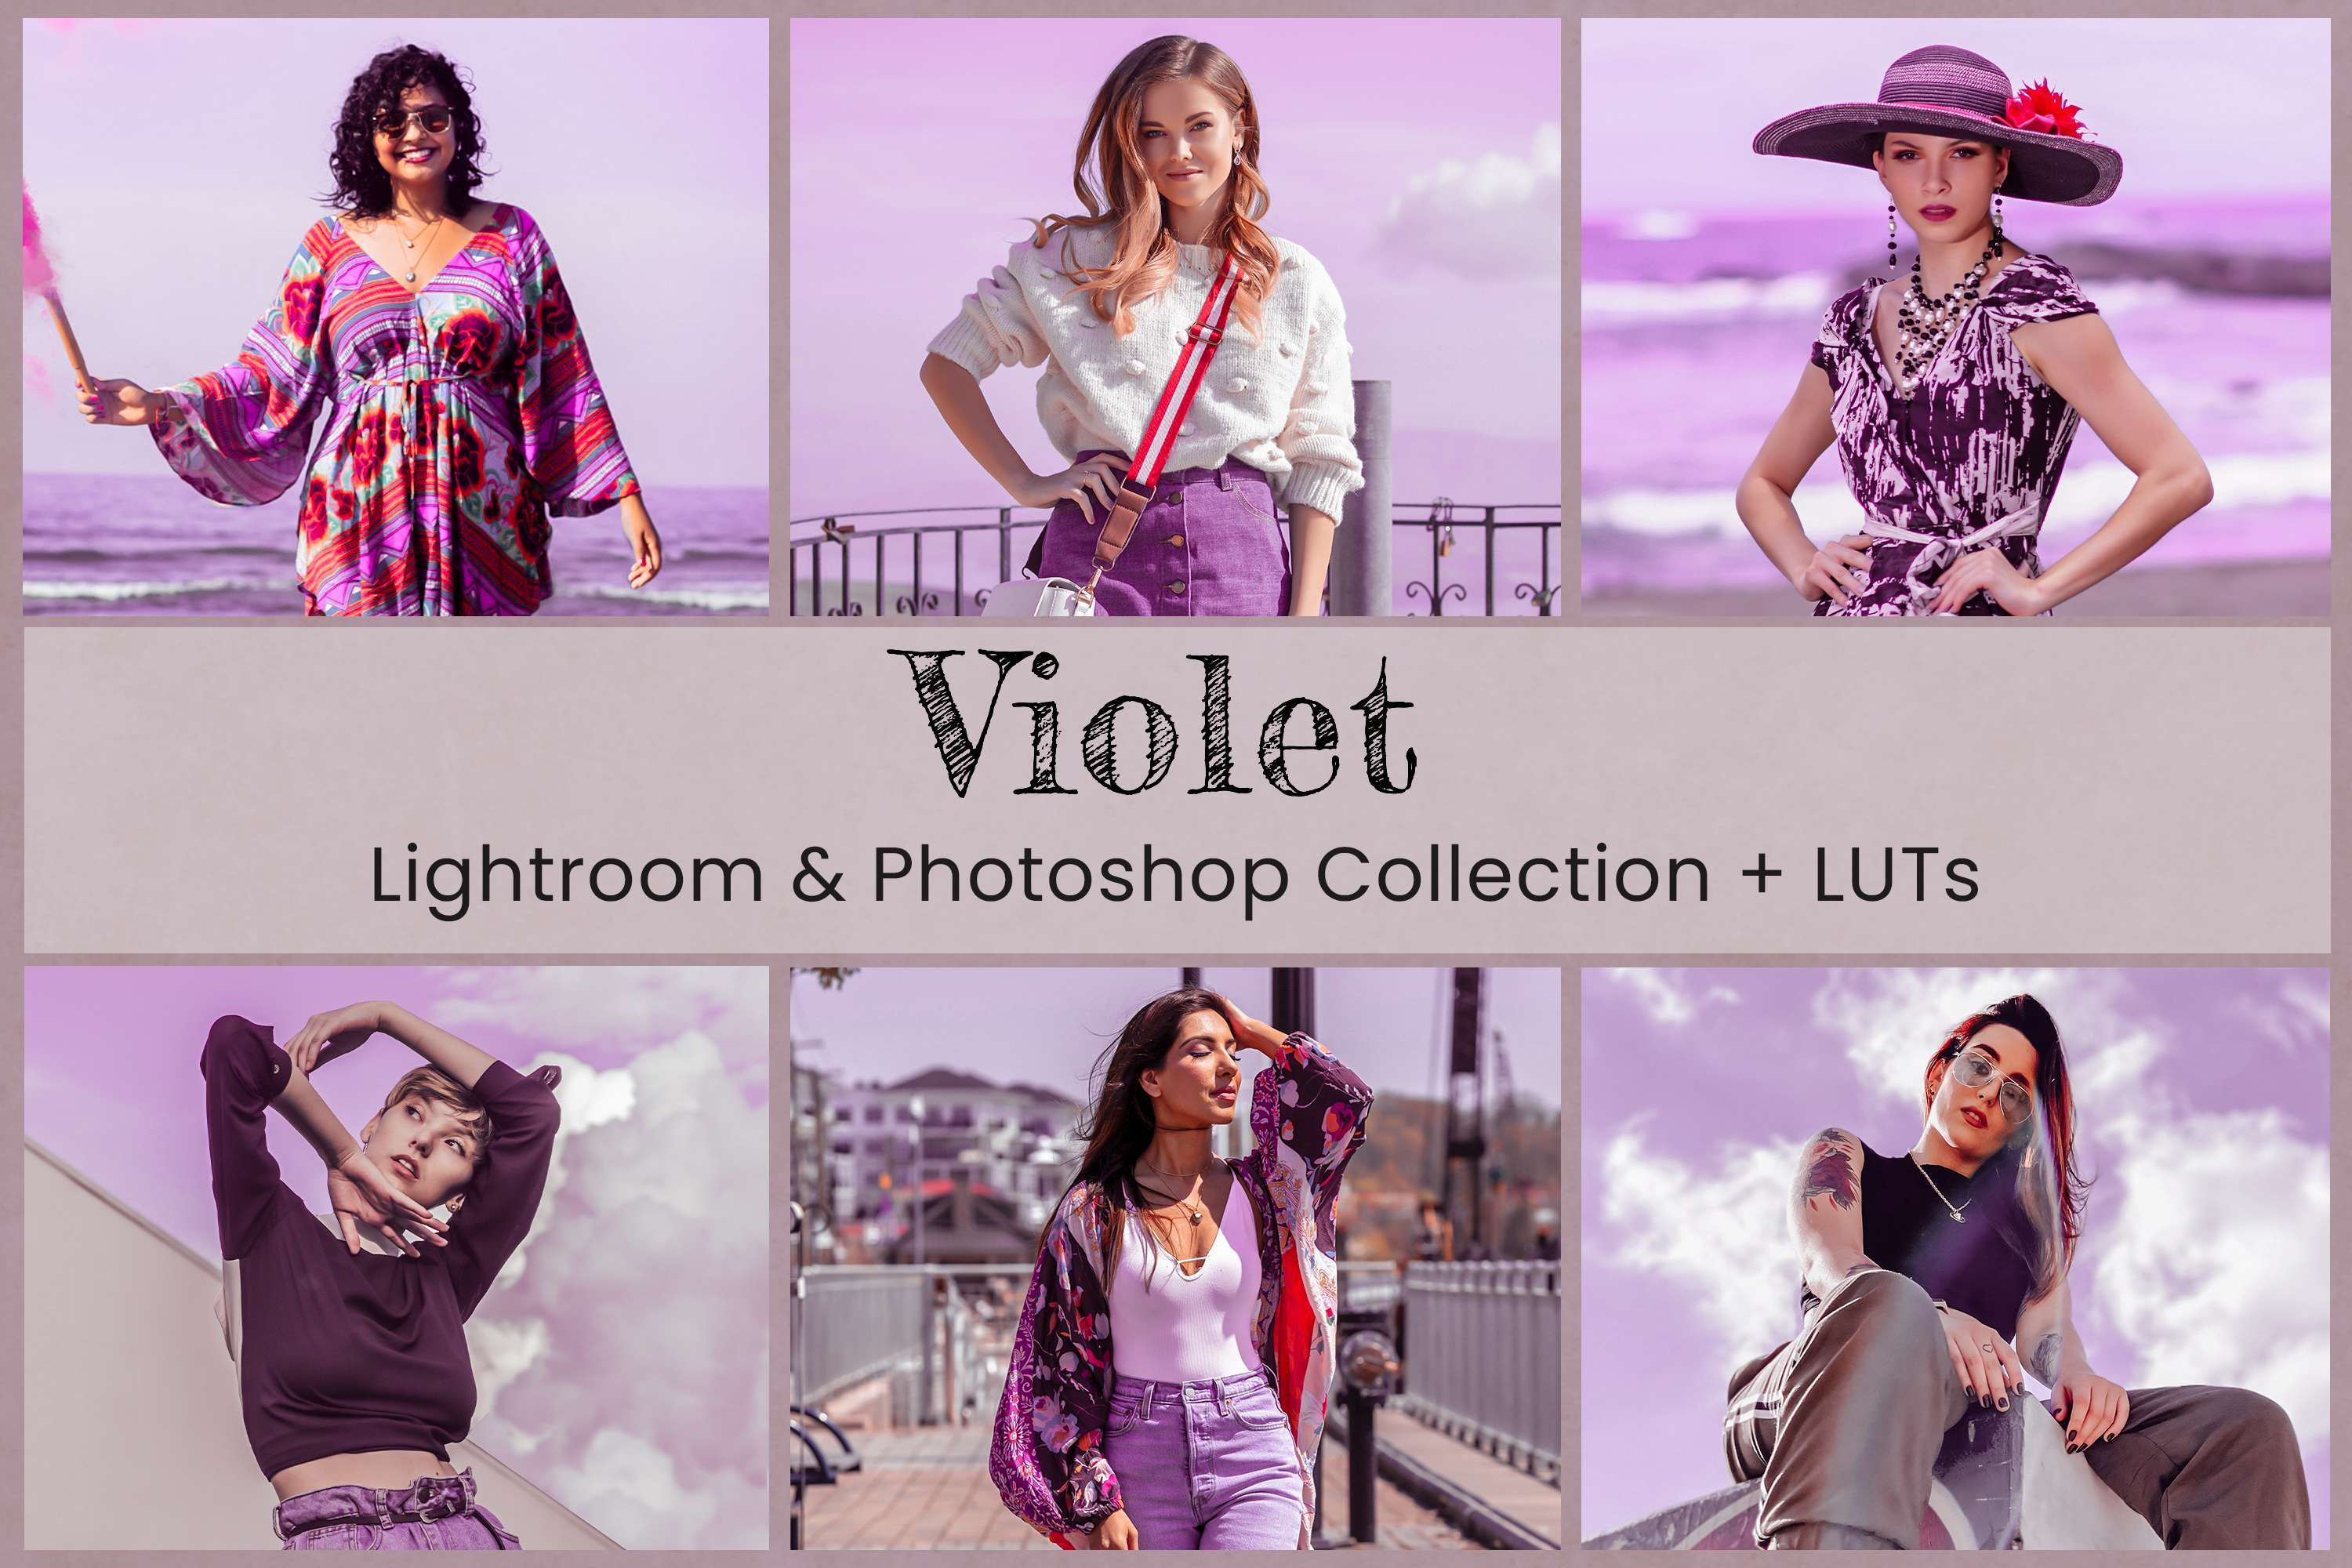 Violet Photoshop Actions Lightroomcover image.